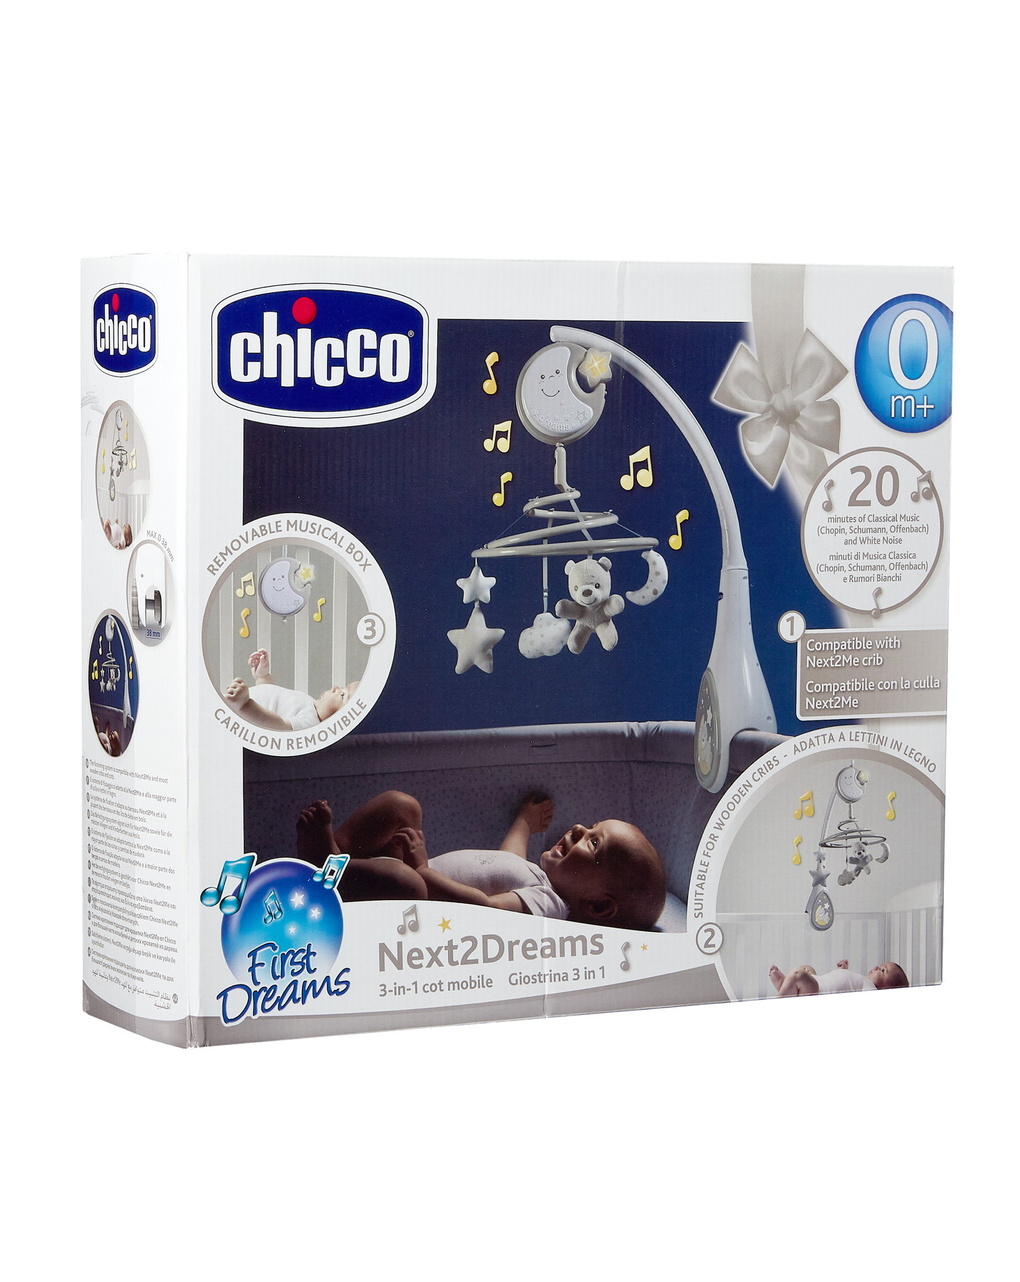 Next2dreams neutral carousel 0+ meses - chicco - Chicco